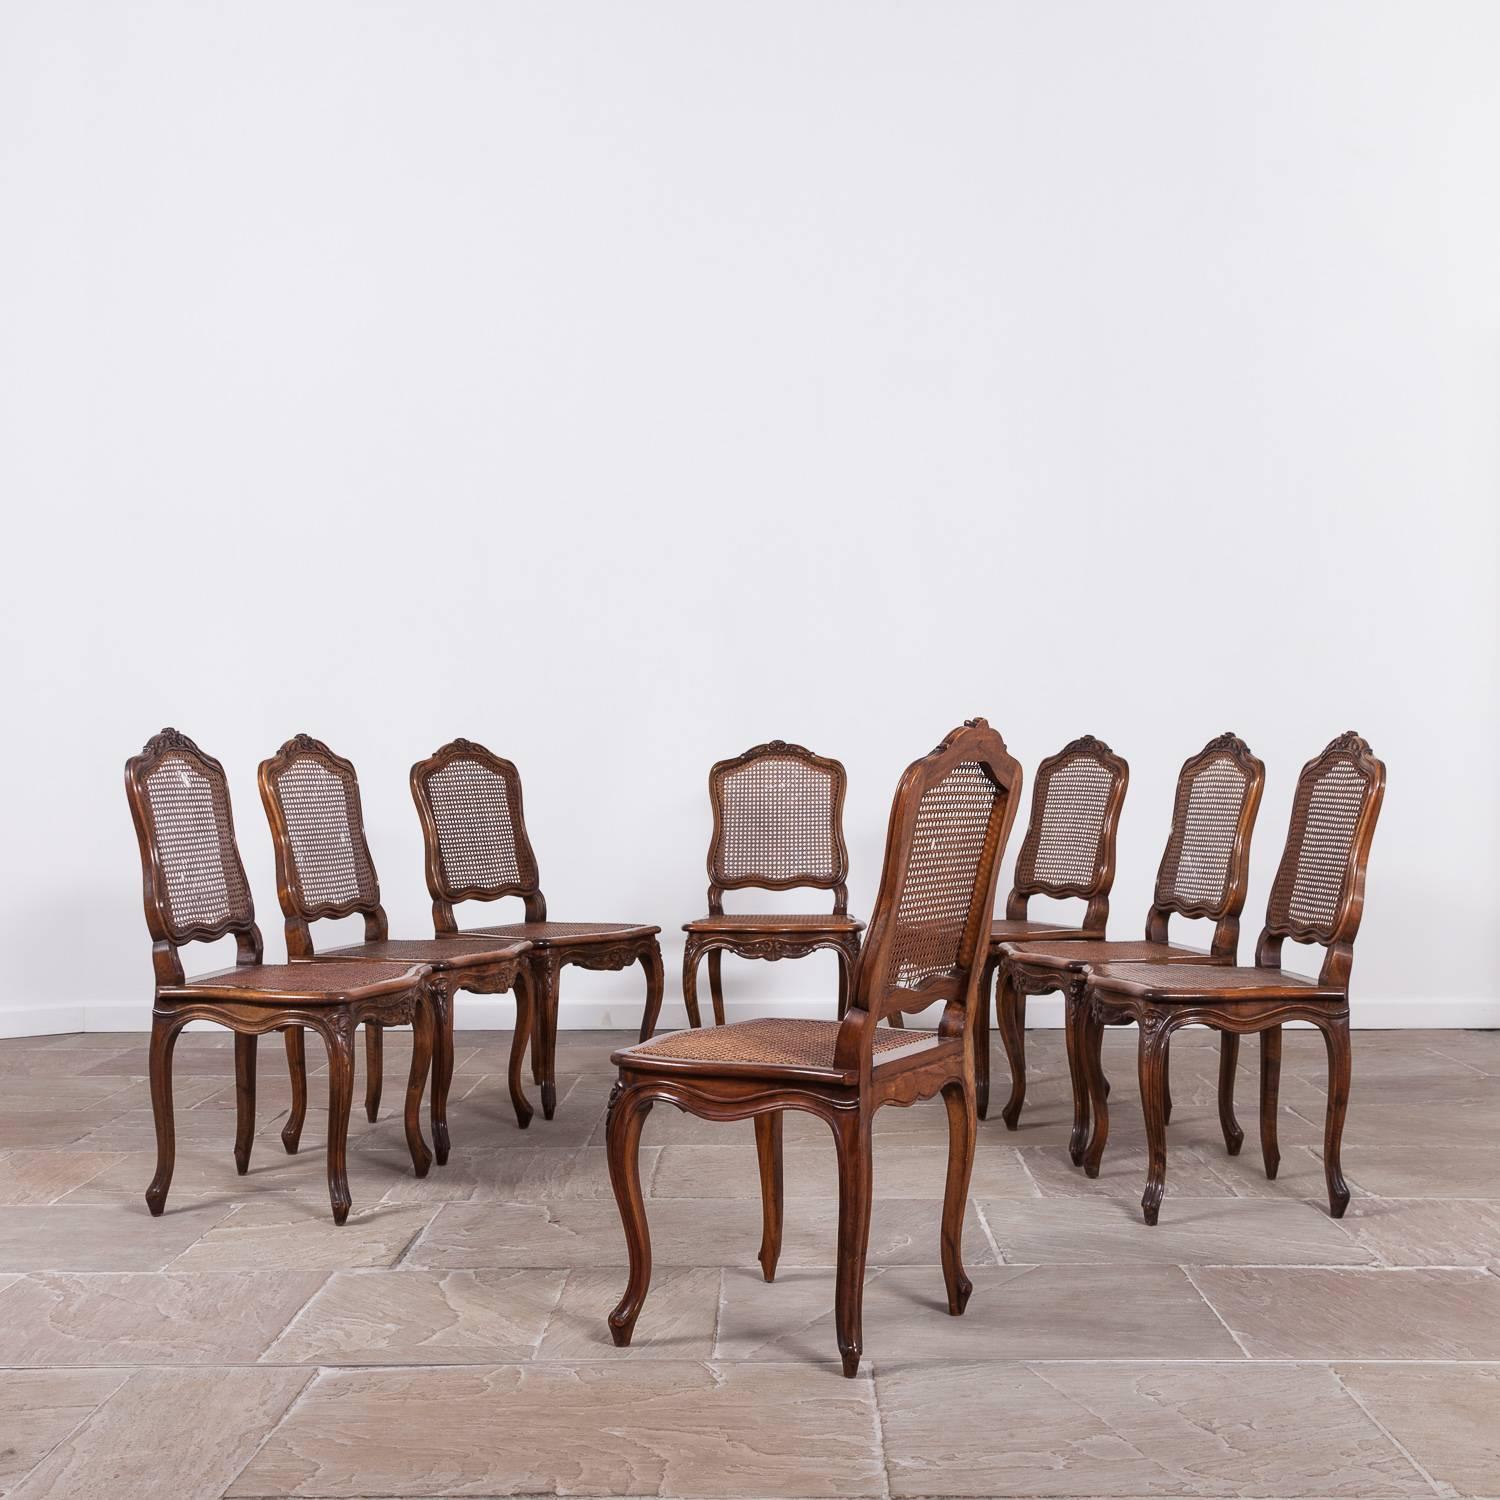 Fantastic set of eight early 20th century French fruitwood chairs. 

The chairs are all in good solid useable condition, there is a couple of small breaks in the cane work and some old woodworm which has been extensively treated. They come with a